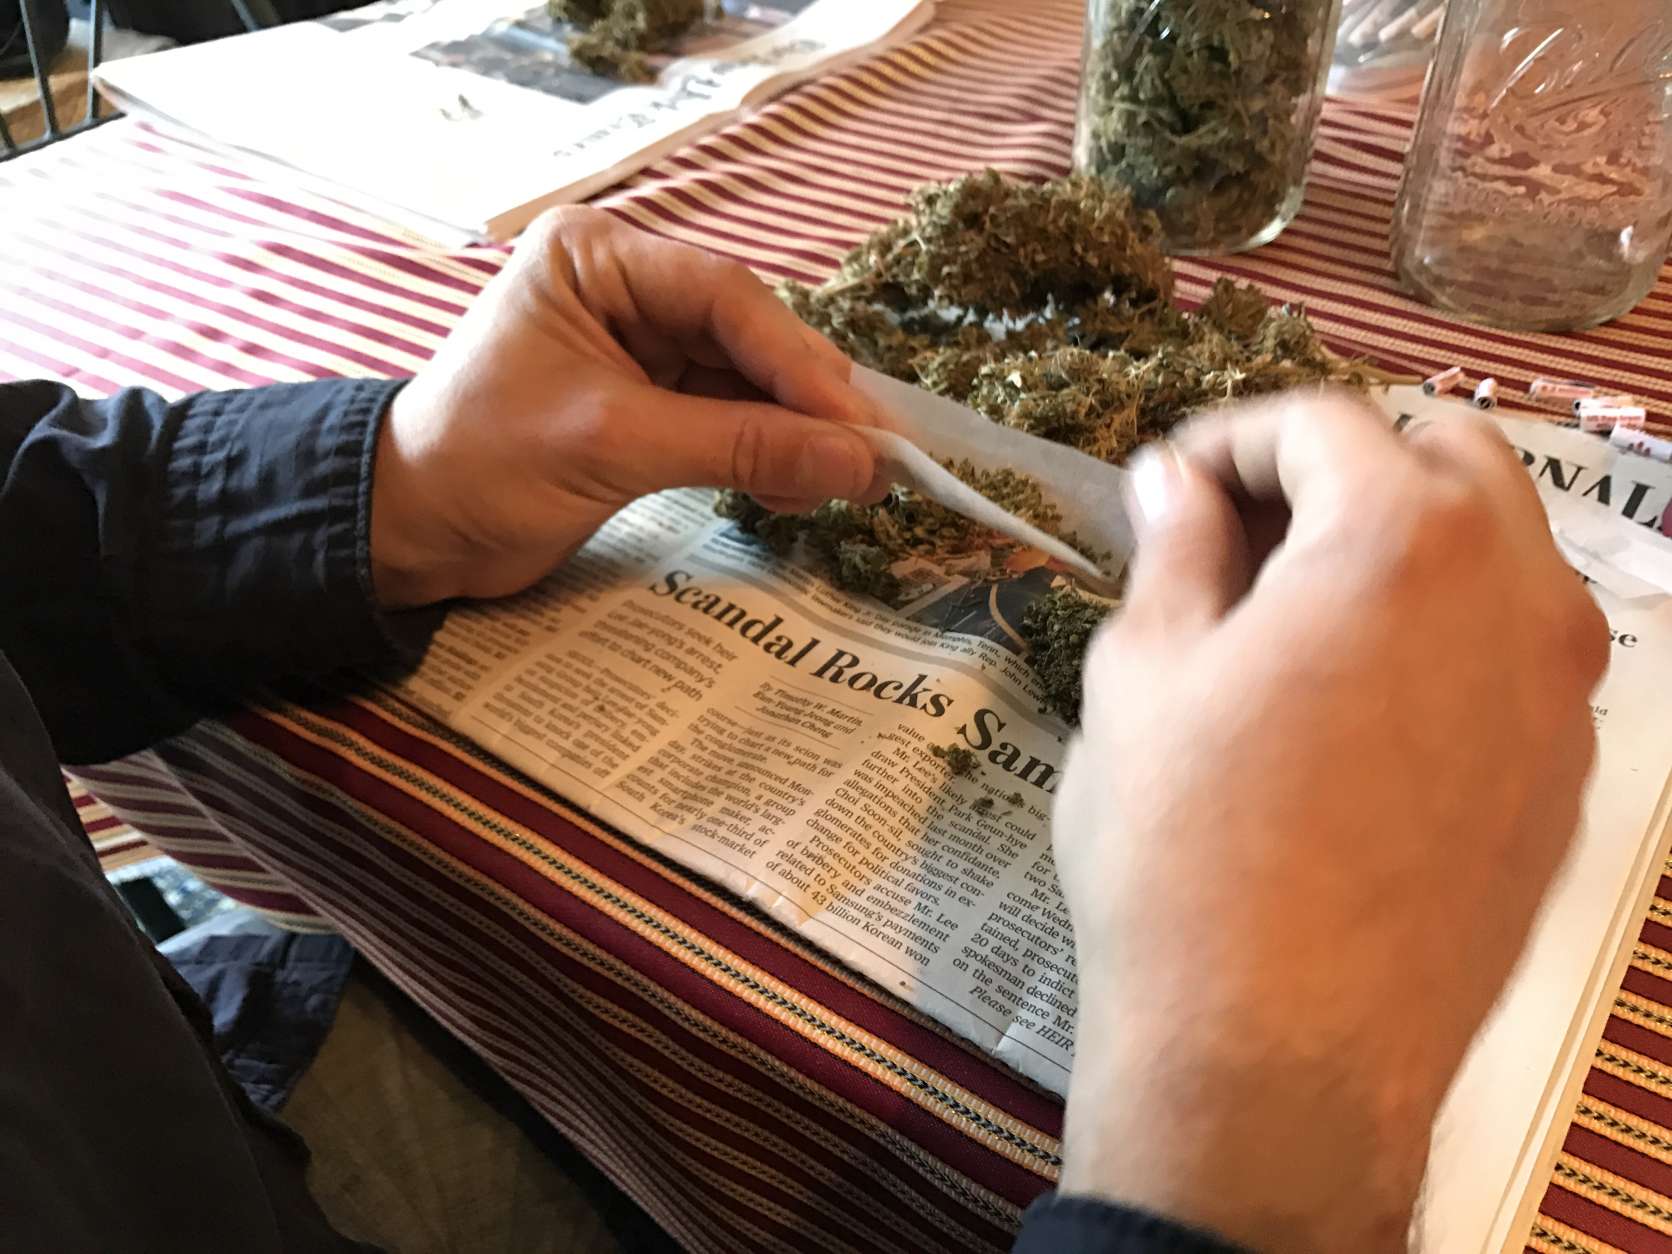 Starting at 8 a.m., on the northwest corner of Dupont Circle, the D.C. Cannabis Coalition will give away free joints to people over 21. (Approximately 5000 joints have been rolled, and will be given away on Inauguration Day in D.C. (WTOP/Neal Augenstein)